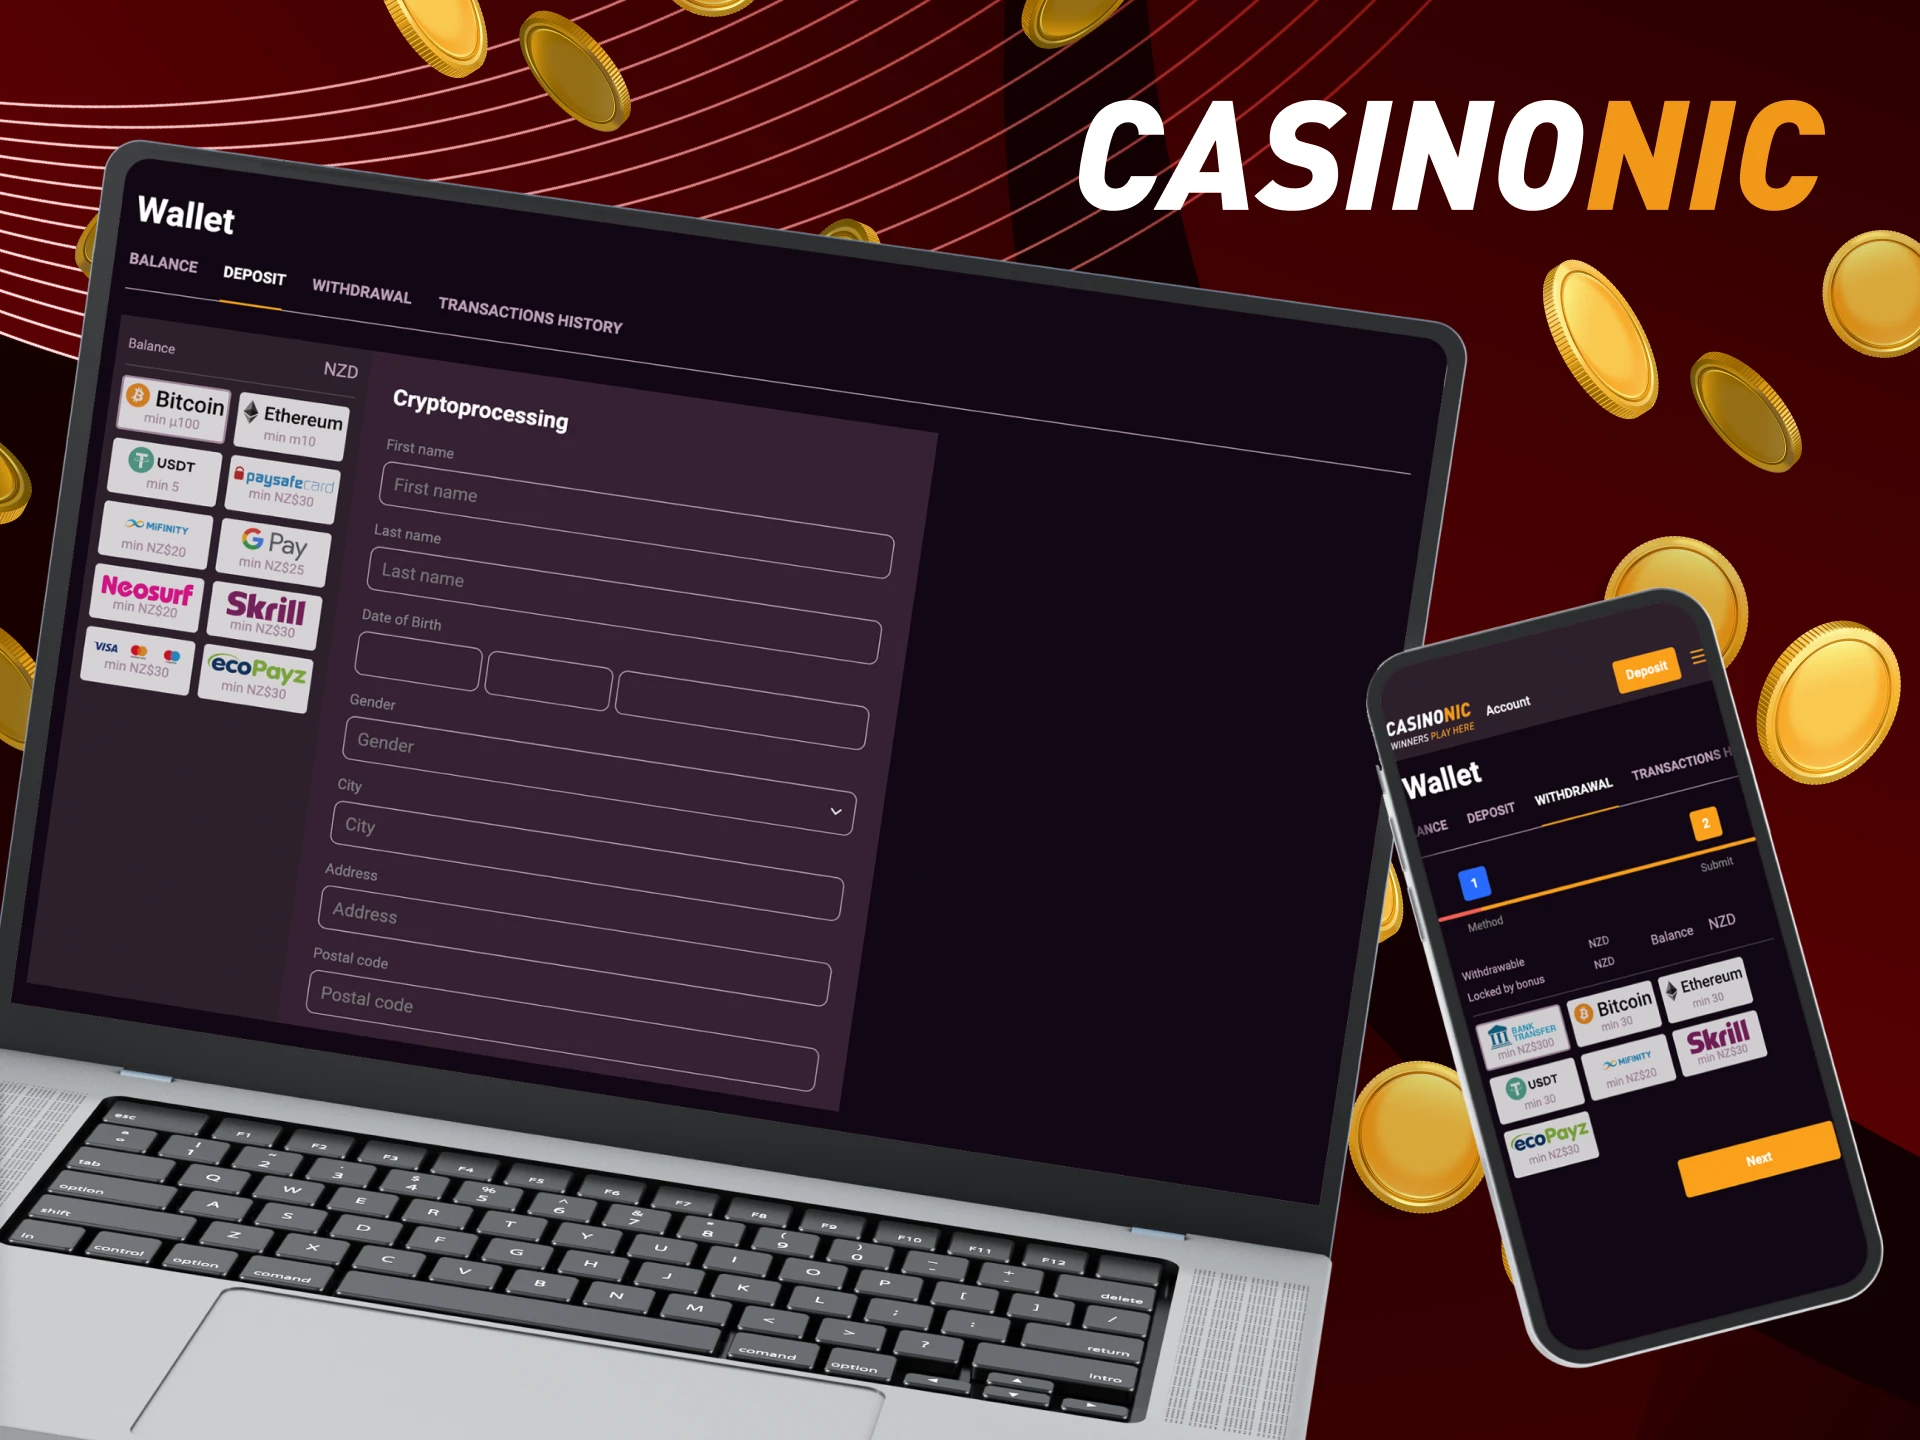 What are the deposit and withdrawal methods at CasinoNic online casino.